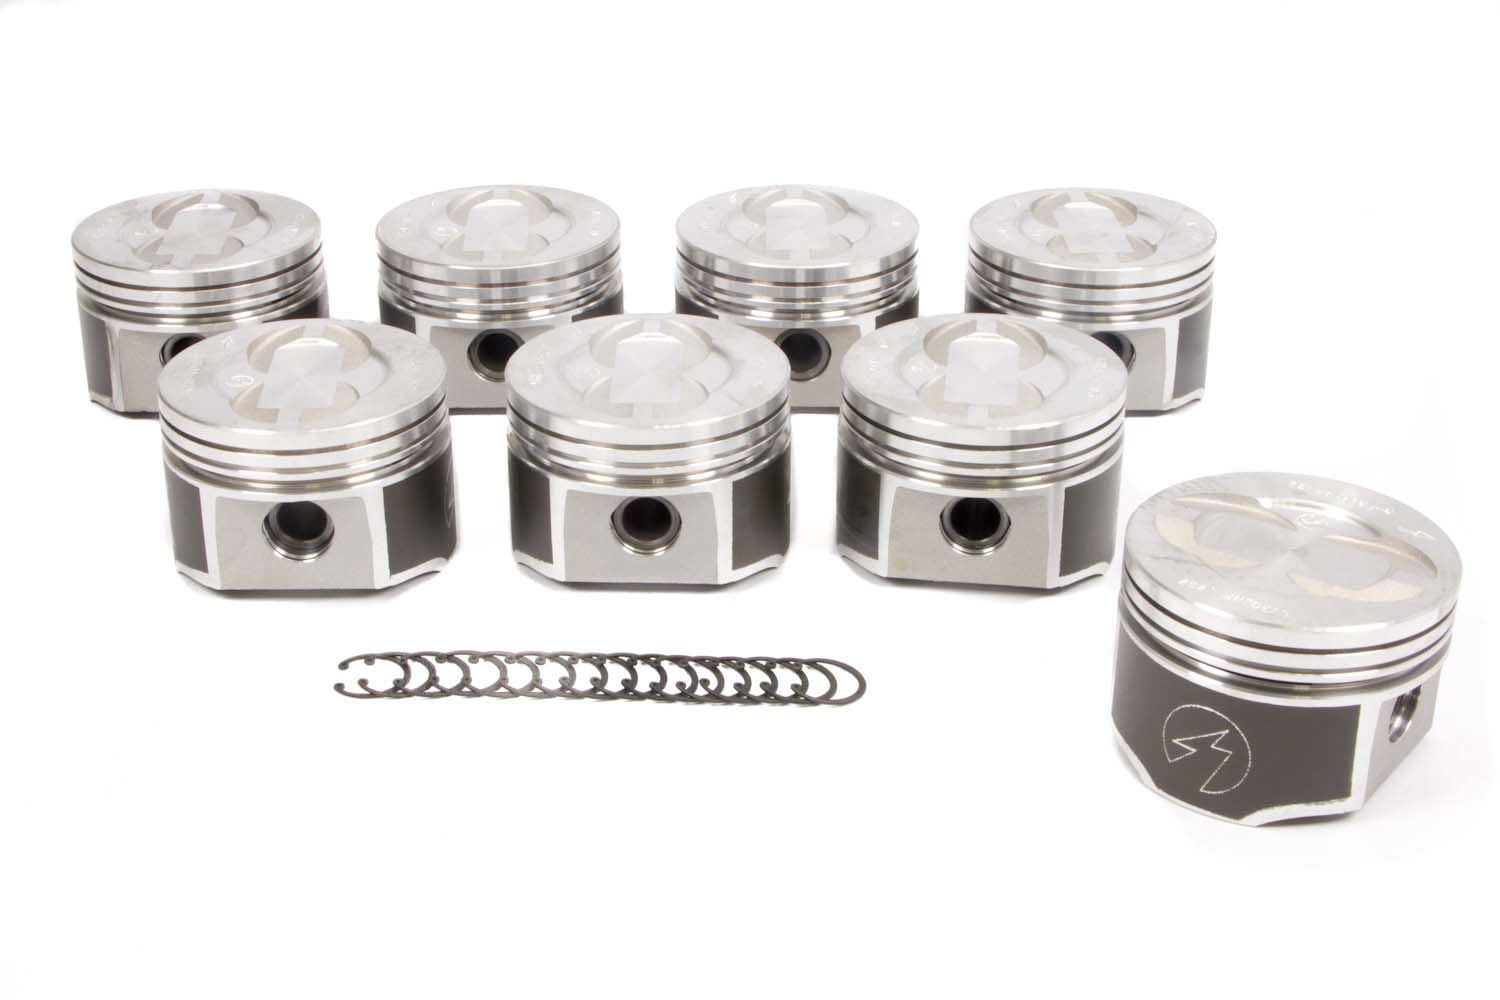 Sealed Power L2303NF30 Piston, Speed Pro, Forged, 4.160 in Bore, 5/64 x 5/64 x 3/16 in Ring Grooves, Minus 10.30 cc, Coated Skirt, Ford FE-Series, Set of 8